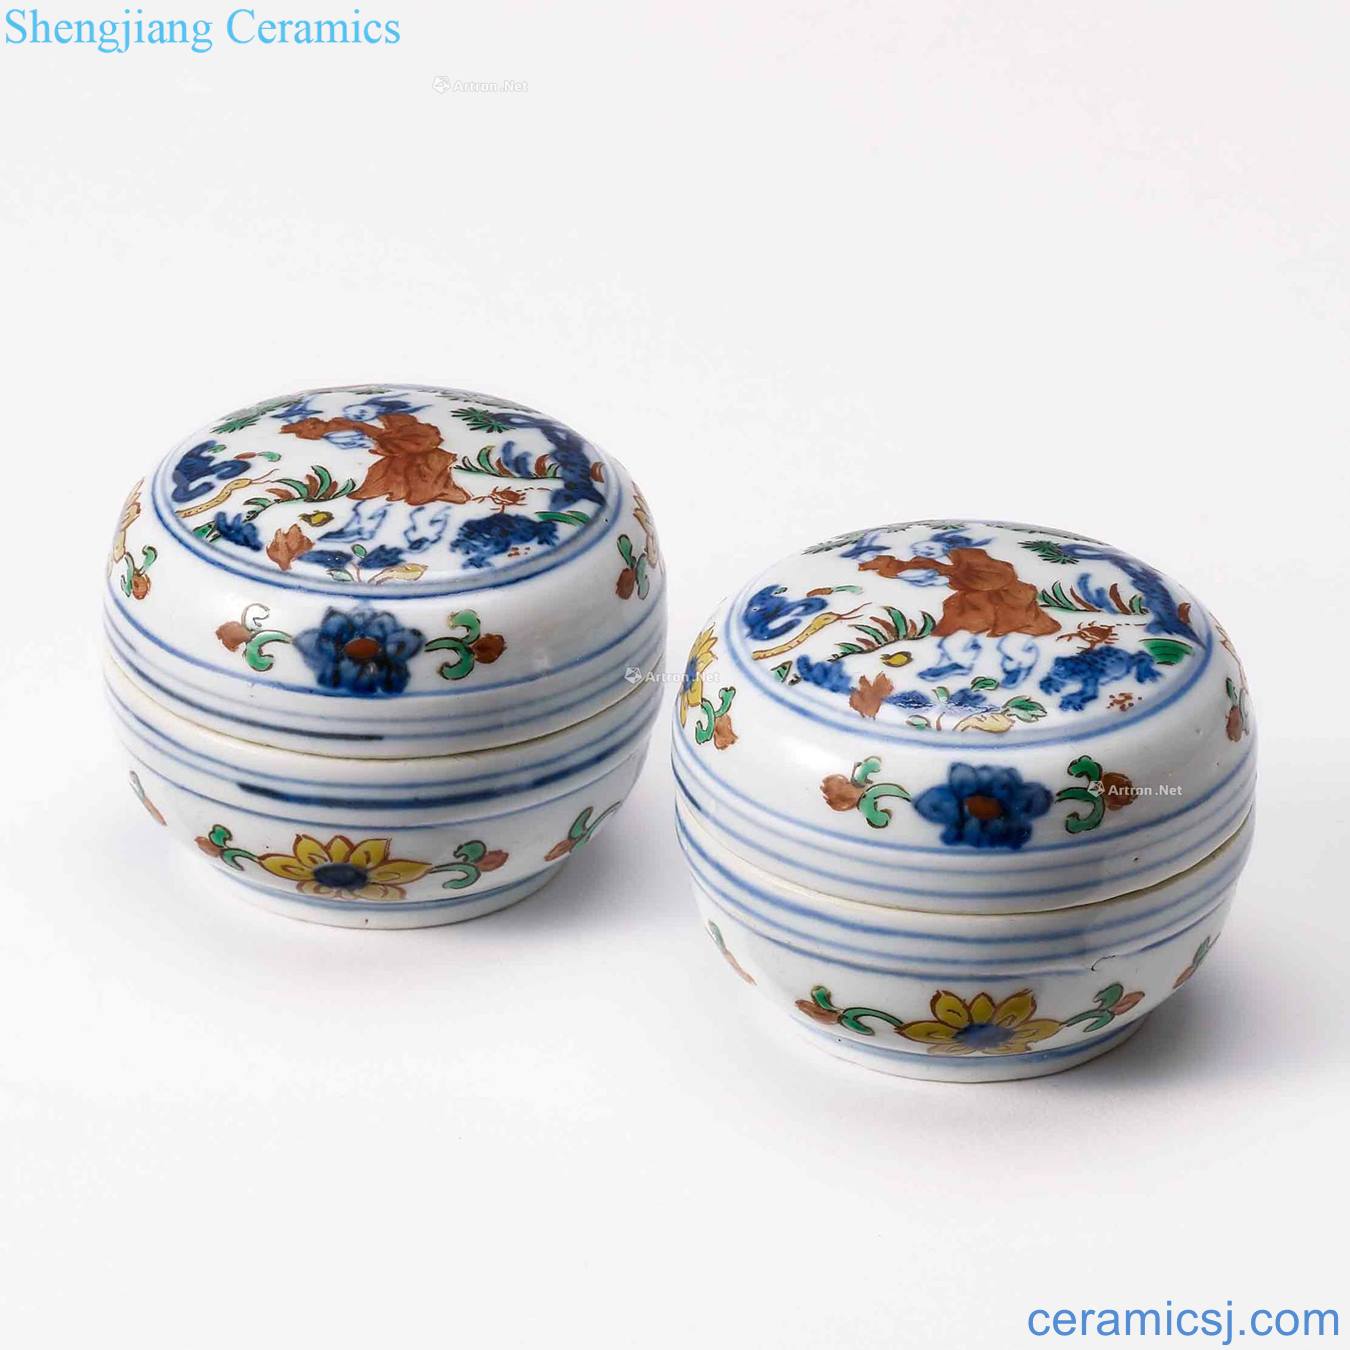 Ming wanli Colorful cover box (a)